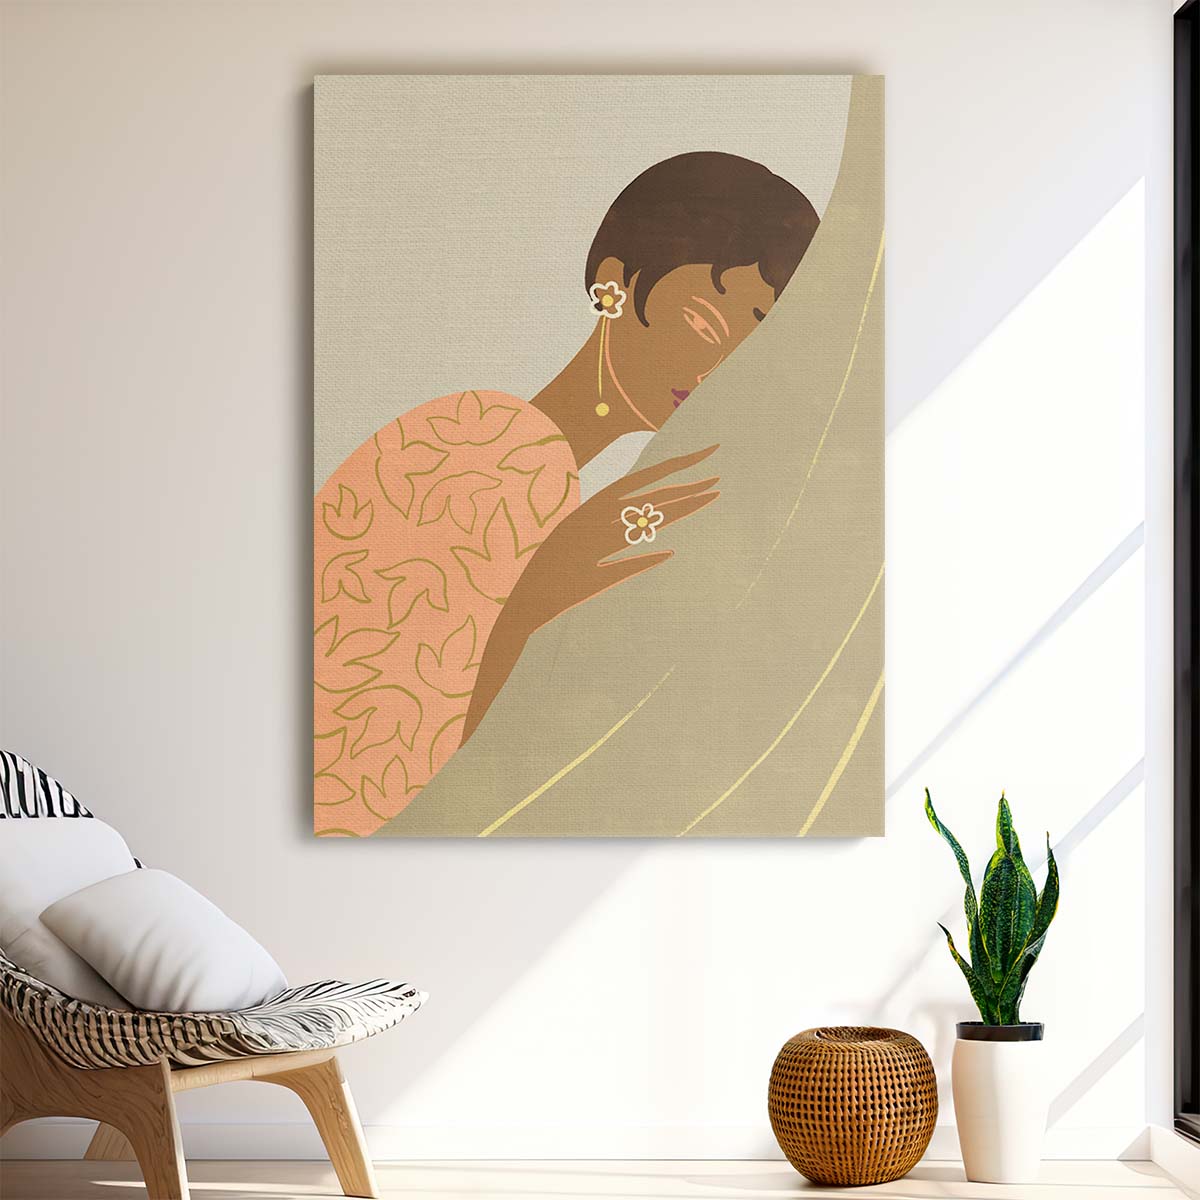 Relaxing Boho Woman Illustration with Pastel Floral Pattern Wall Art by Luxuriance Designs, made in USA